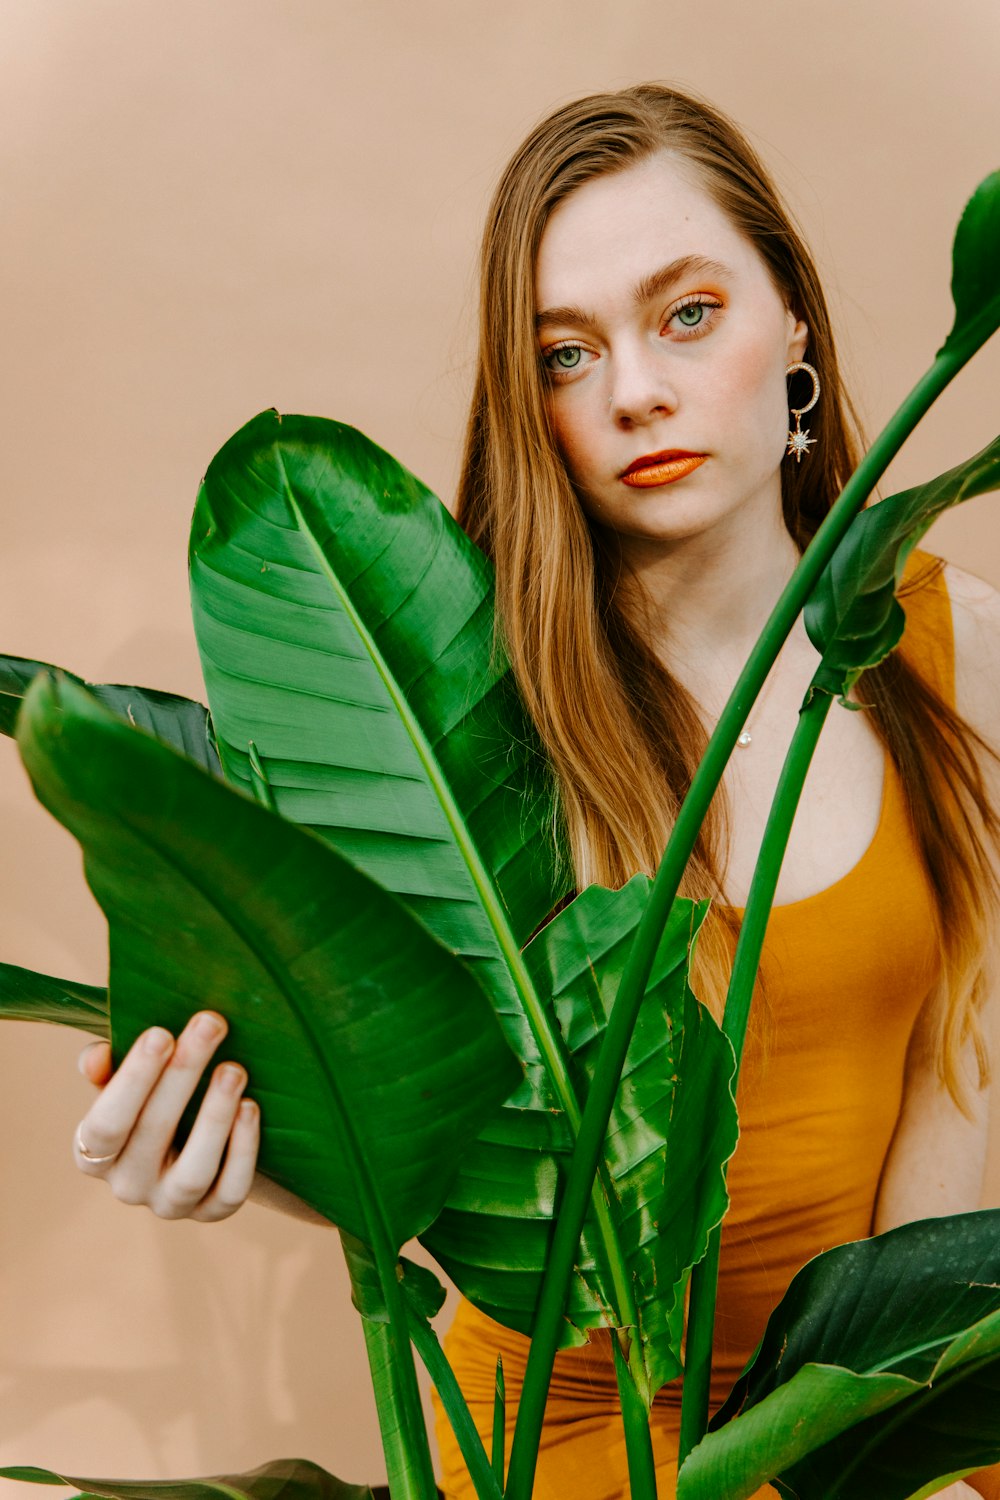 Woman in yellow tank top holding green leaves photo – Free Leaf Image on  Unsplash